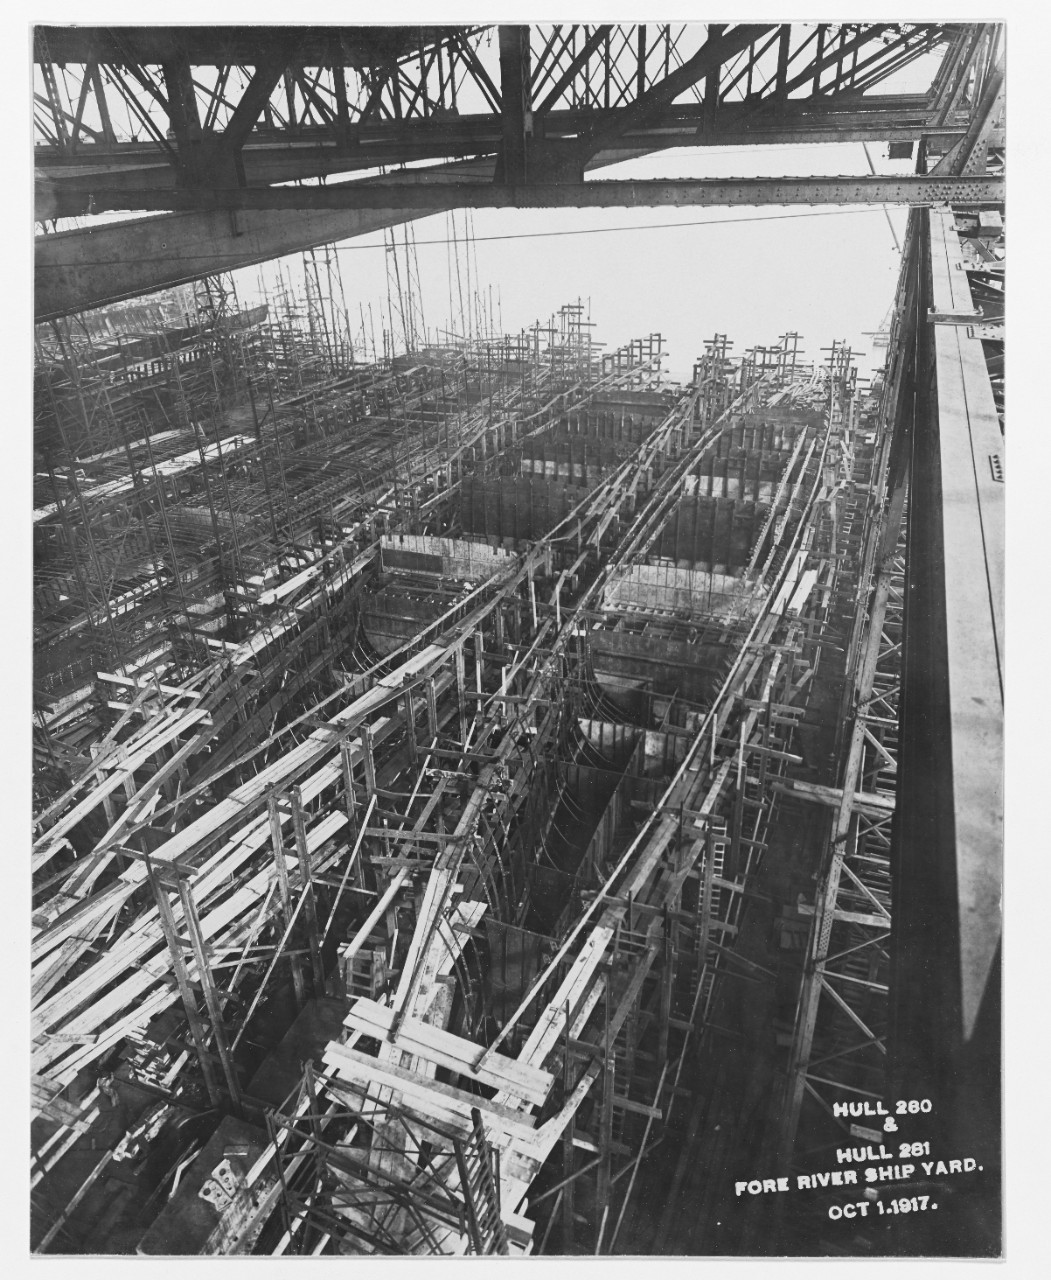 Photo #: NH 43019  Fore River Shipbuilding Company, Quincy, Massachusetts